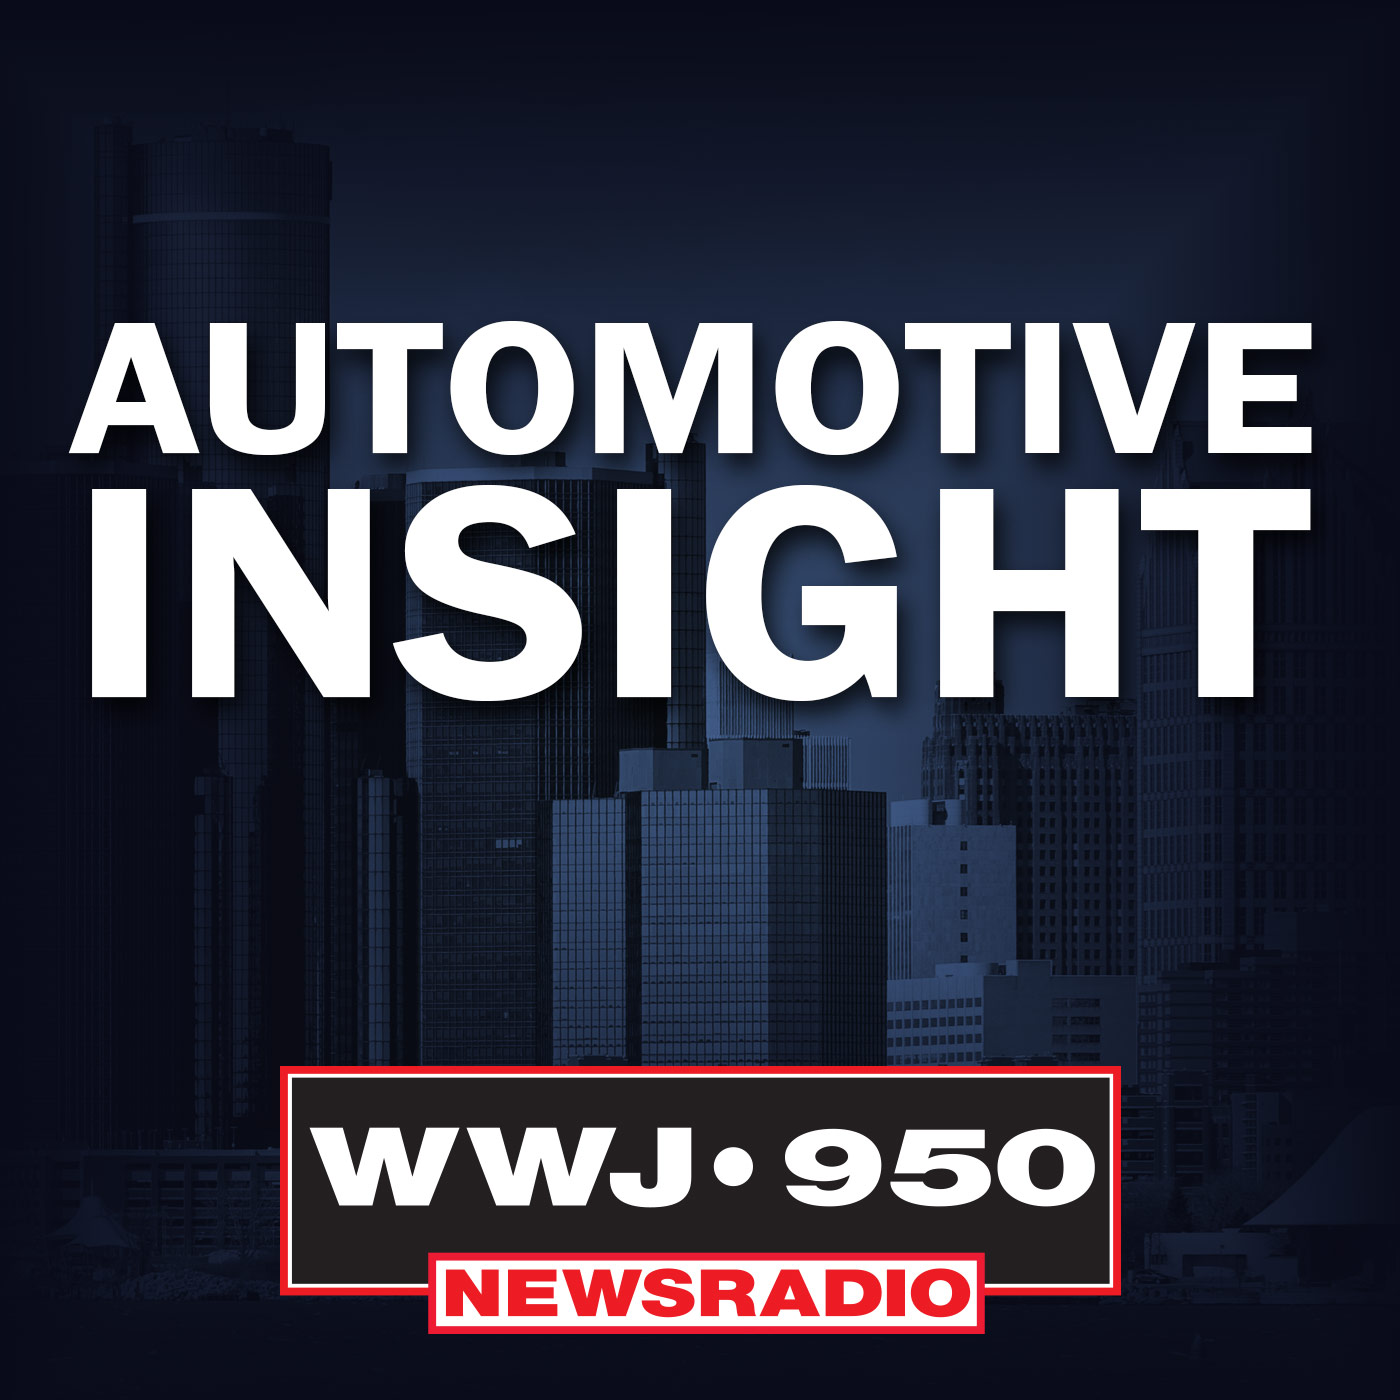 Automotive Insight -  Breaks & tires are worst PM polluters